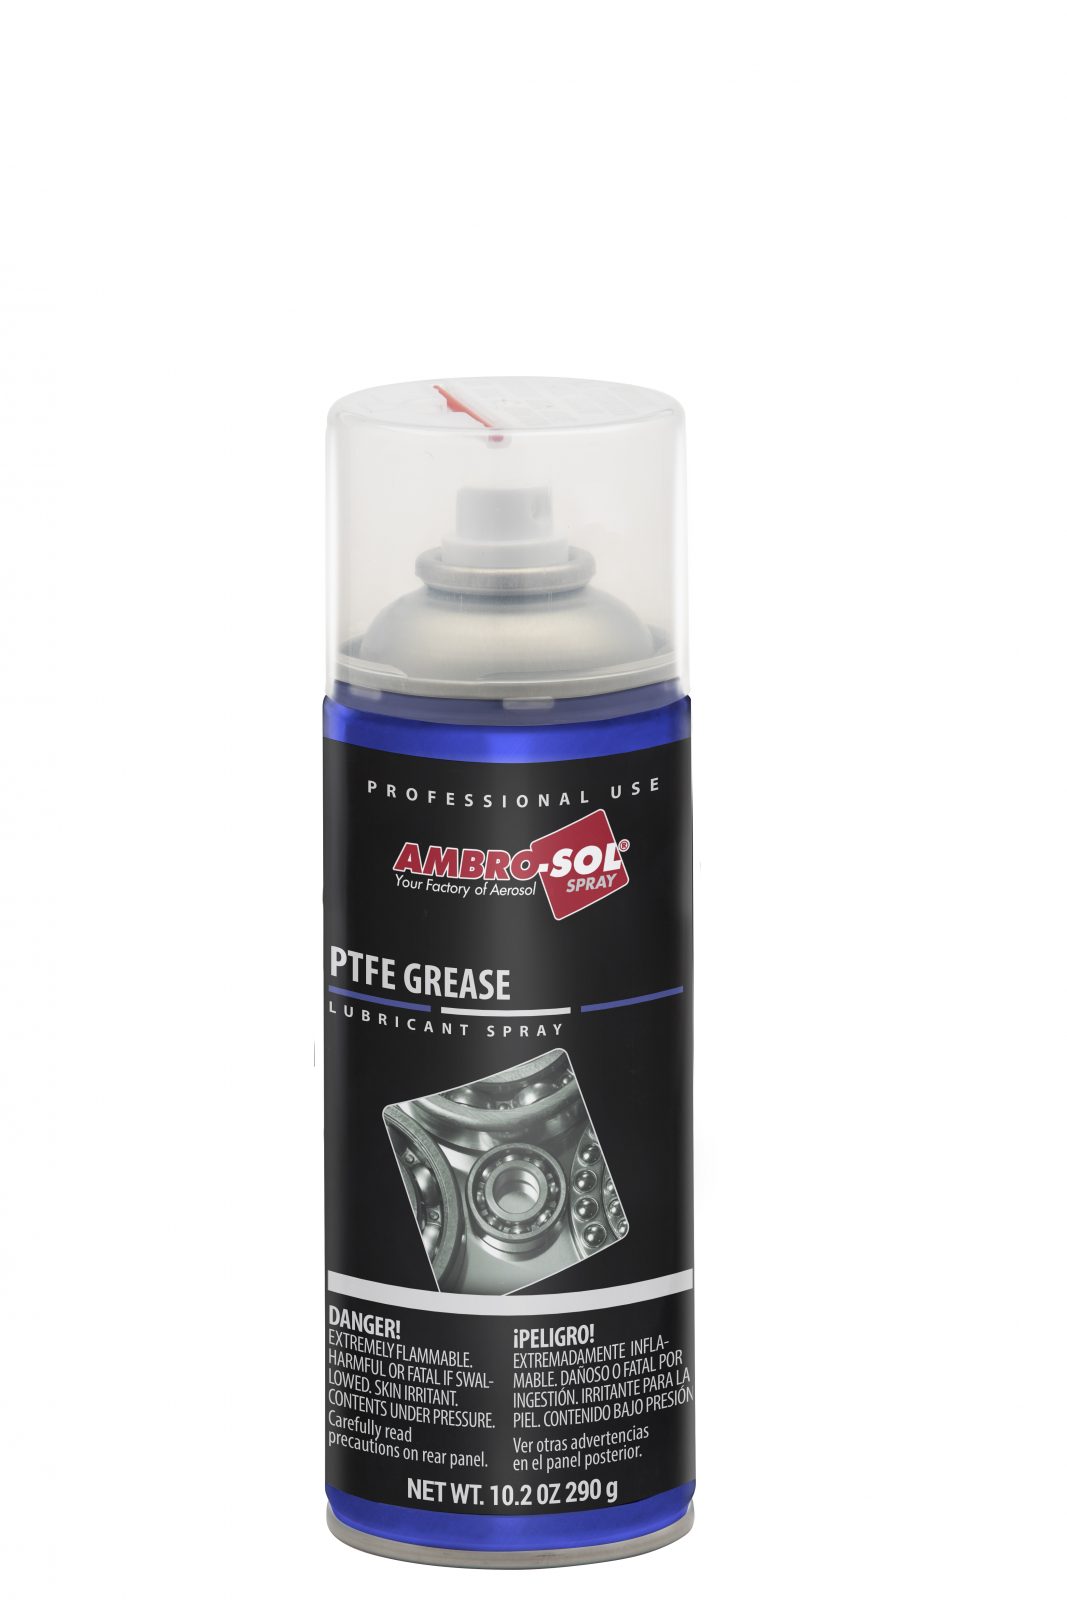 PTFE Grease is a high quality grease that prevents corrosion and performs at high temperatures? PTFE Grease is the perfect product for any job, shop today!